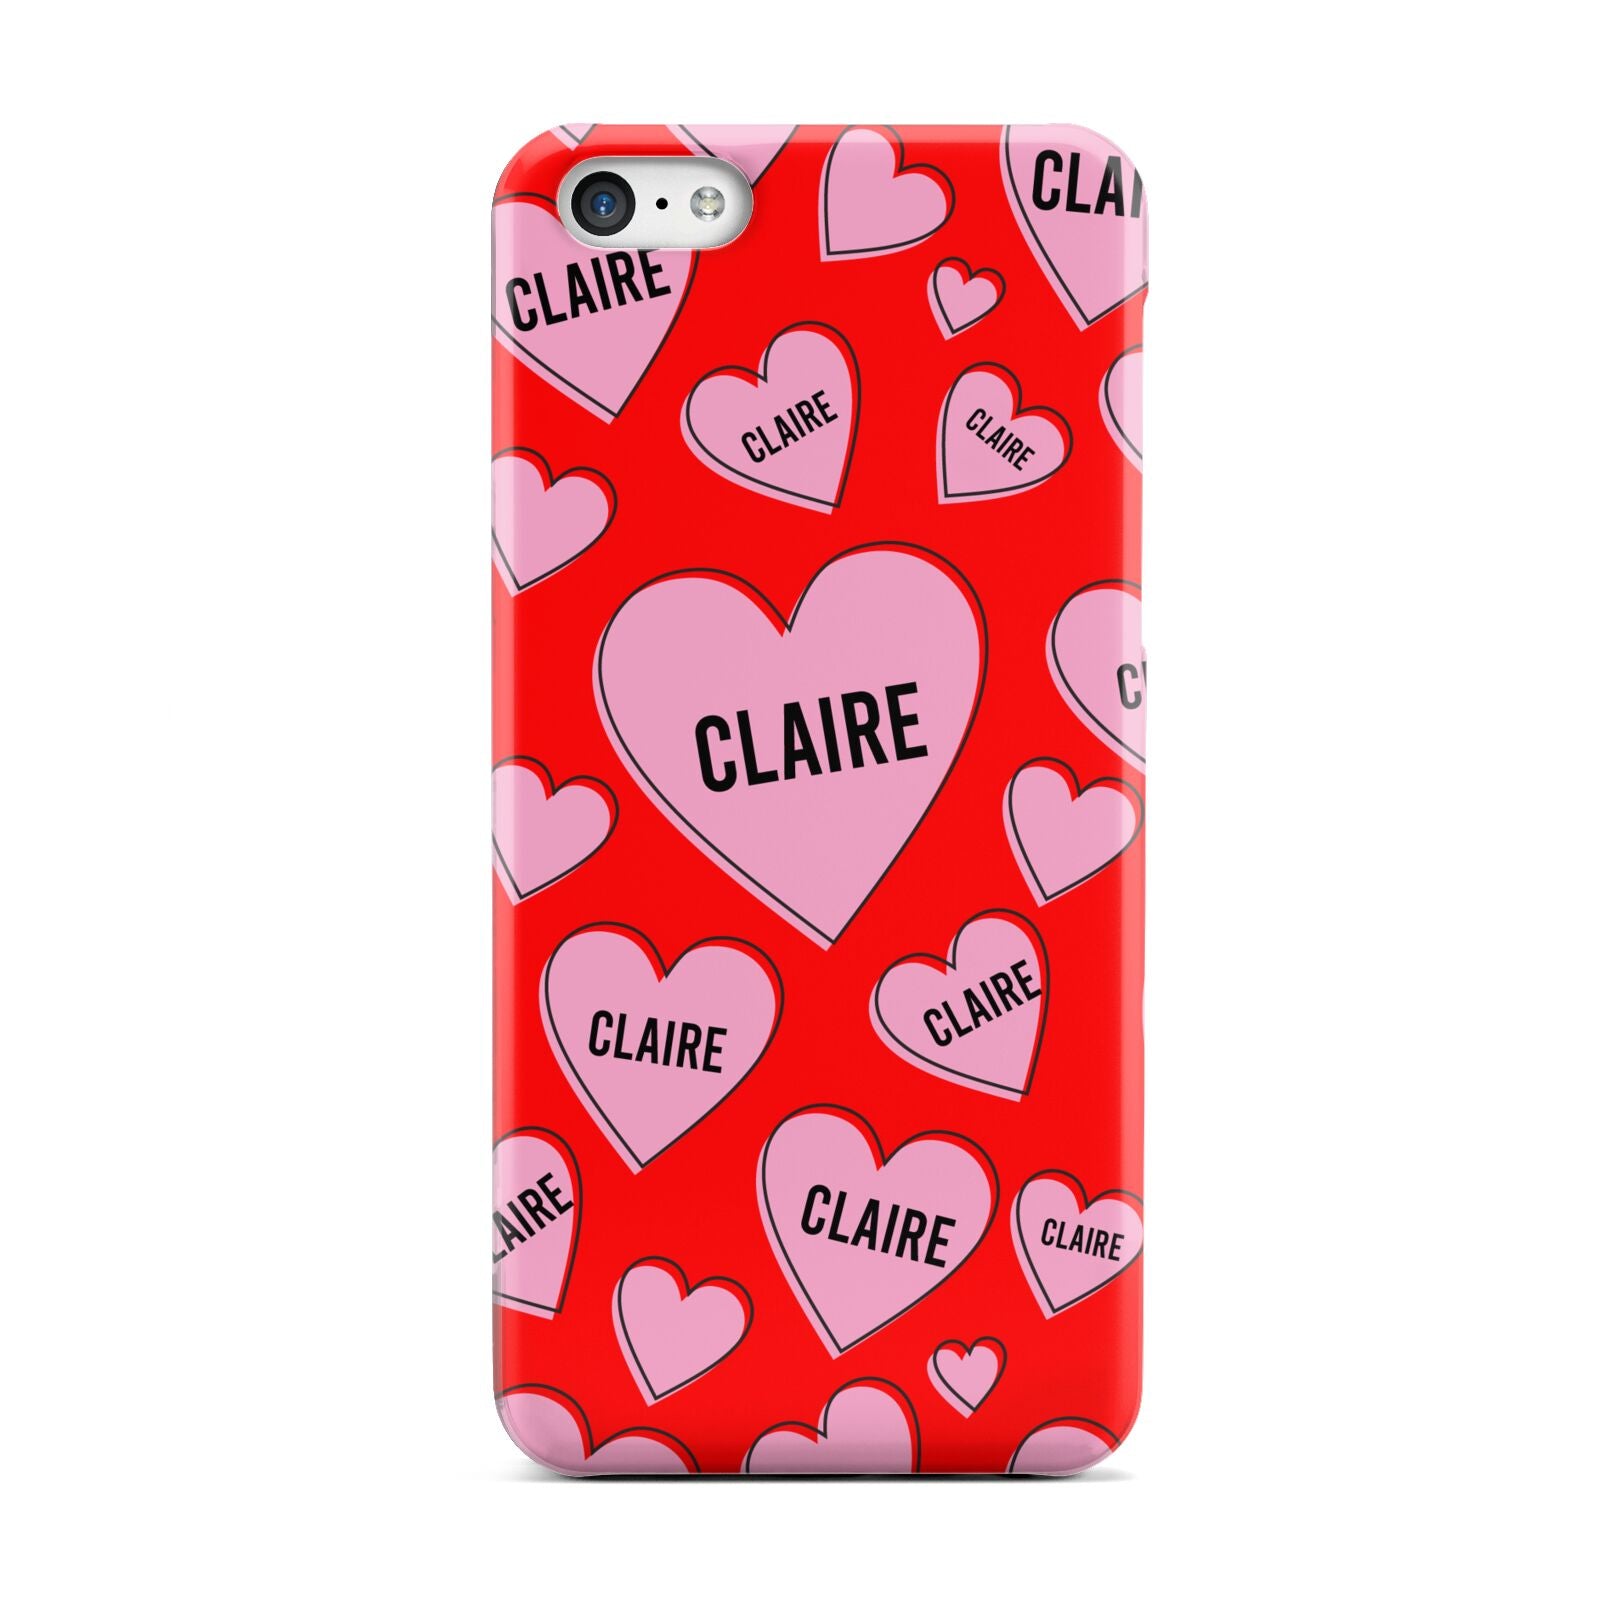 Personalised Hearts Apple iPhone 5c Case